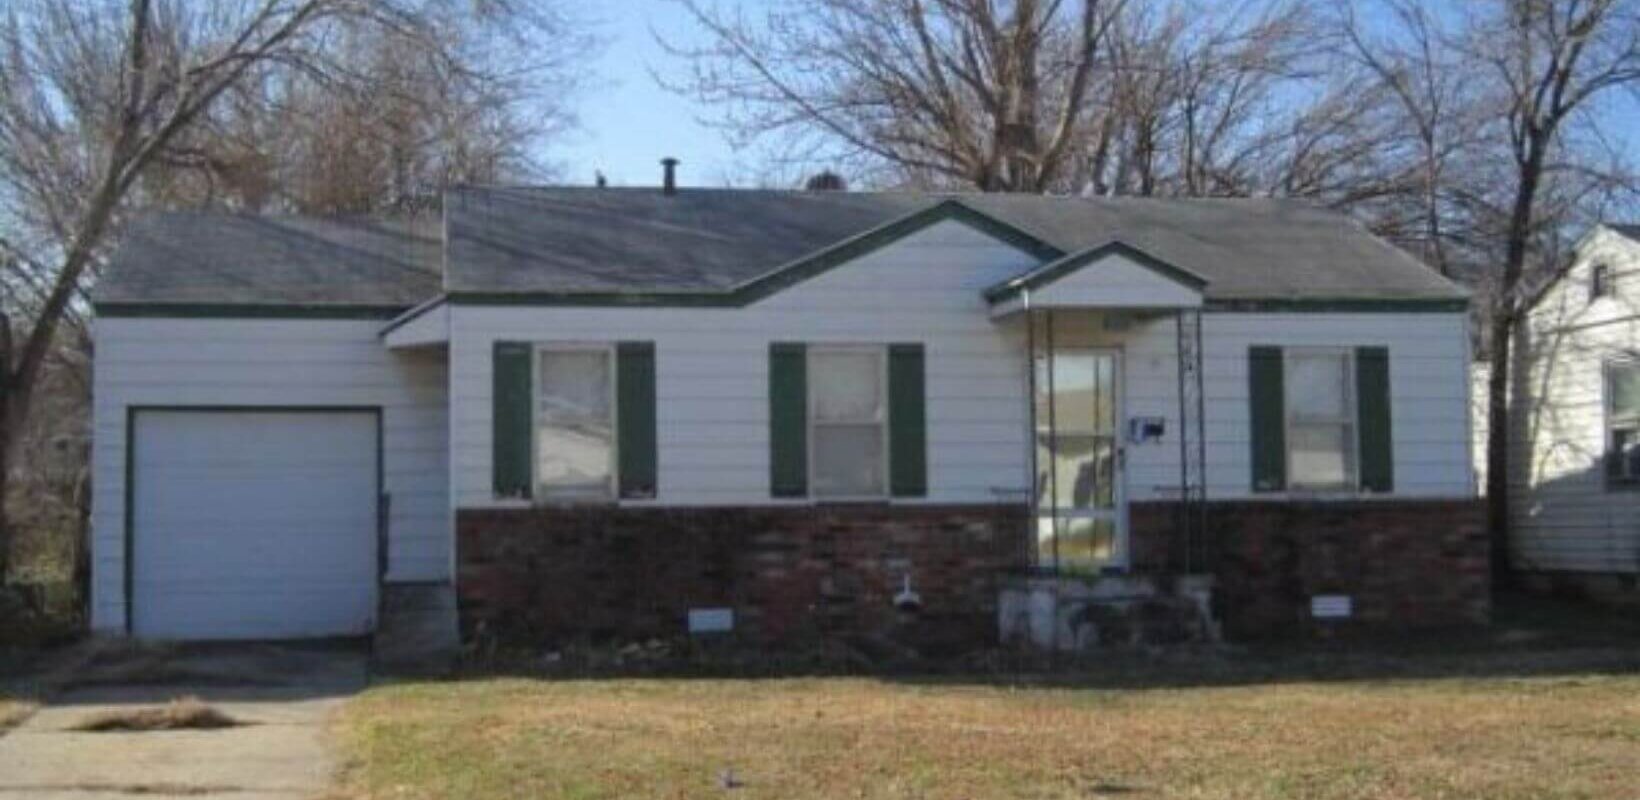 sell my house for cash McAlester OK